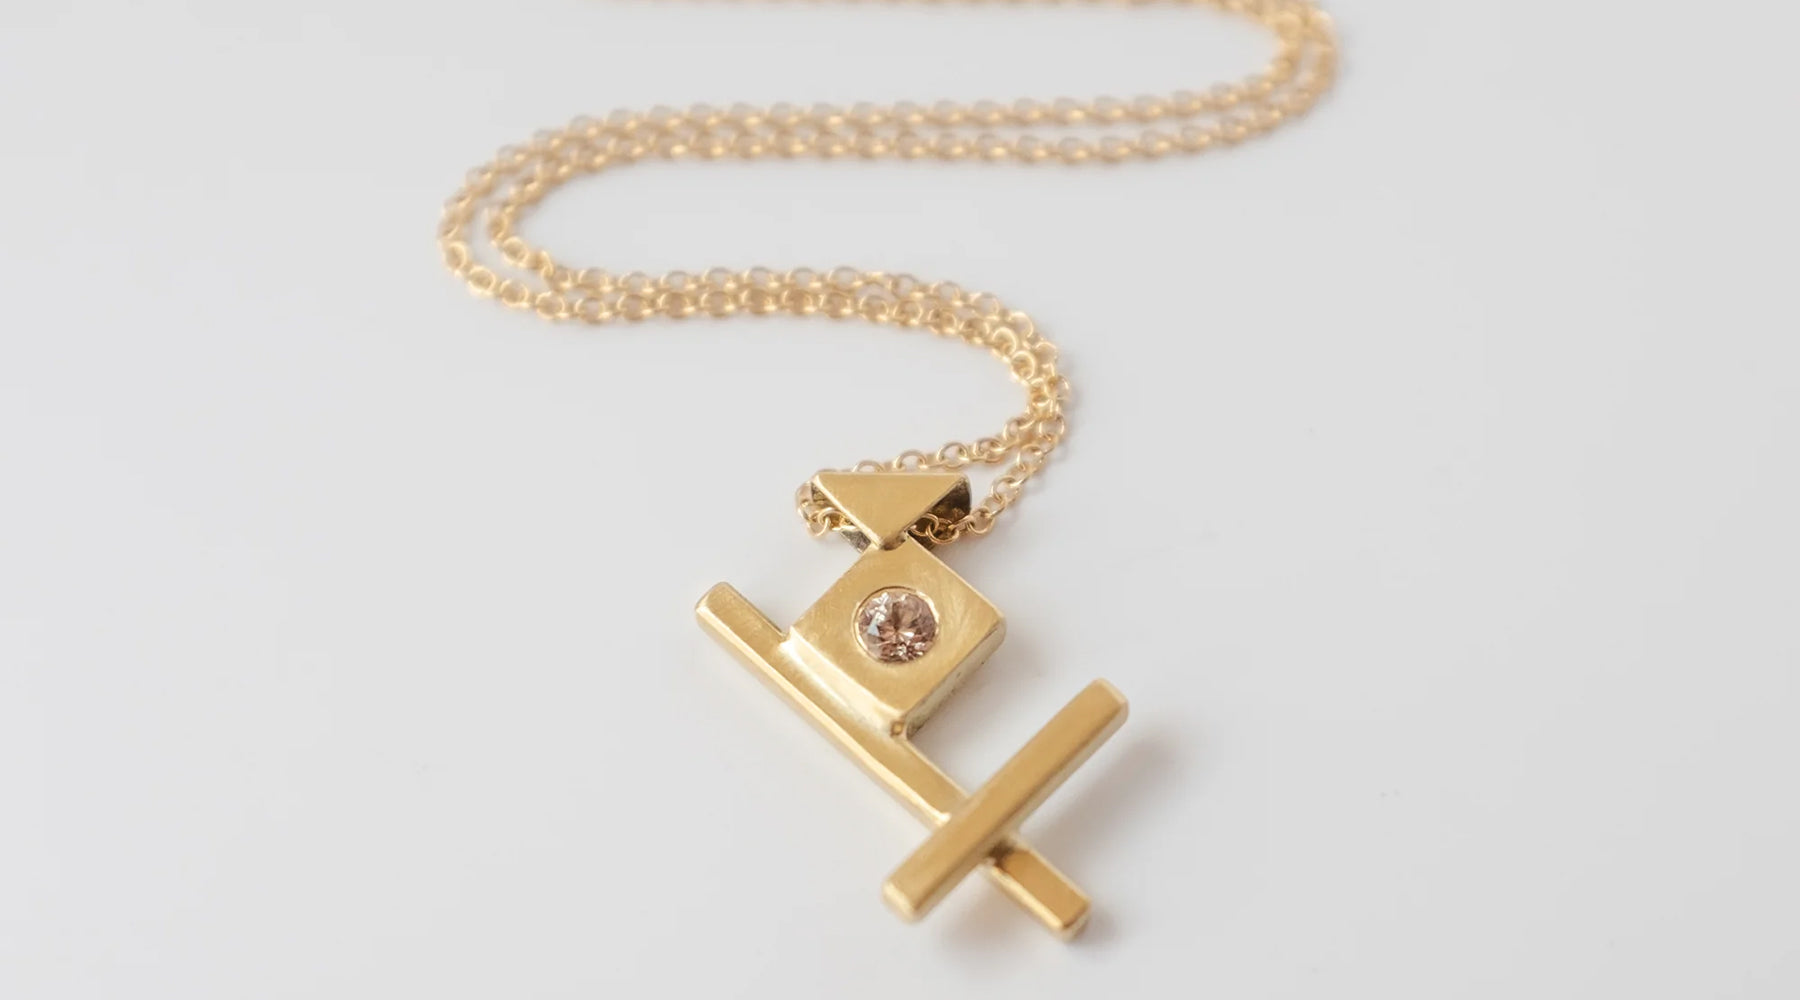 Custom ethically made, Fairmined gold necklace by Truss and Ore